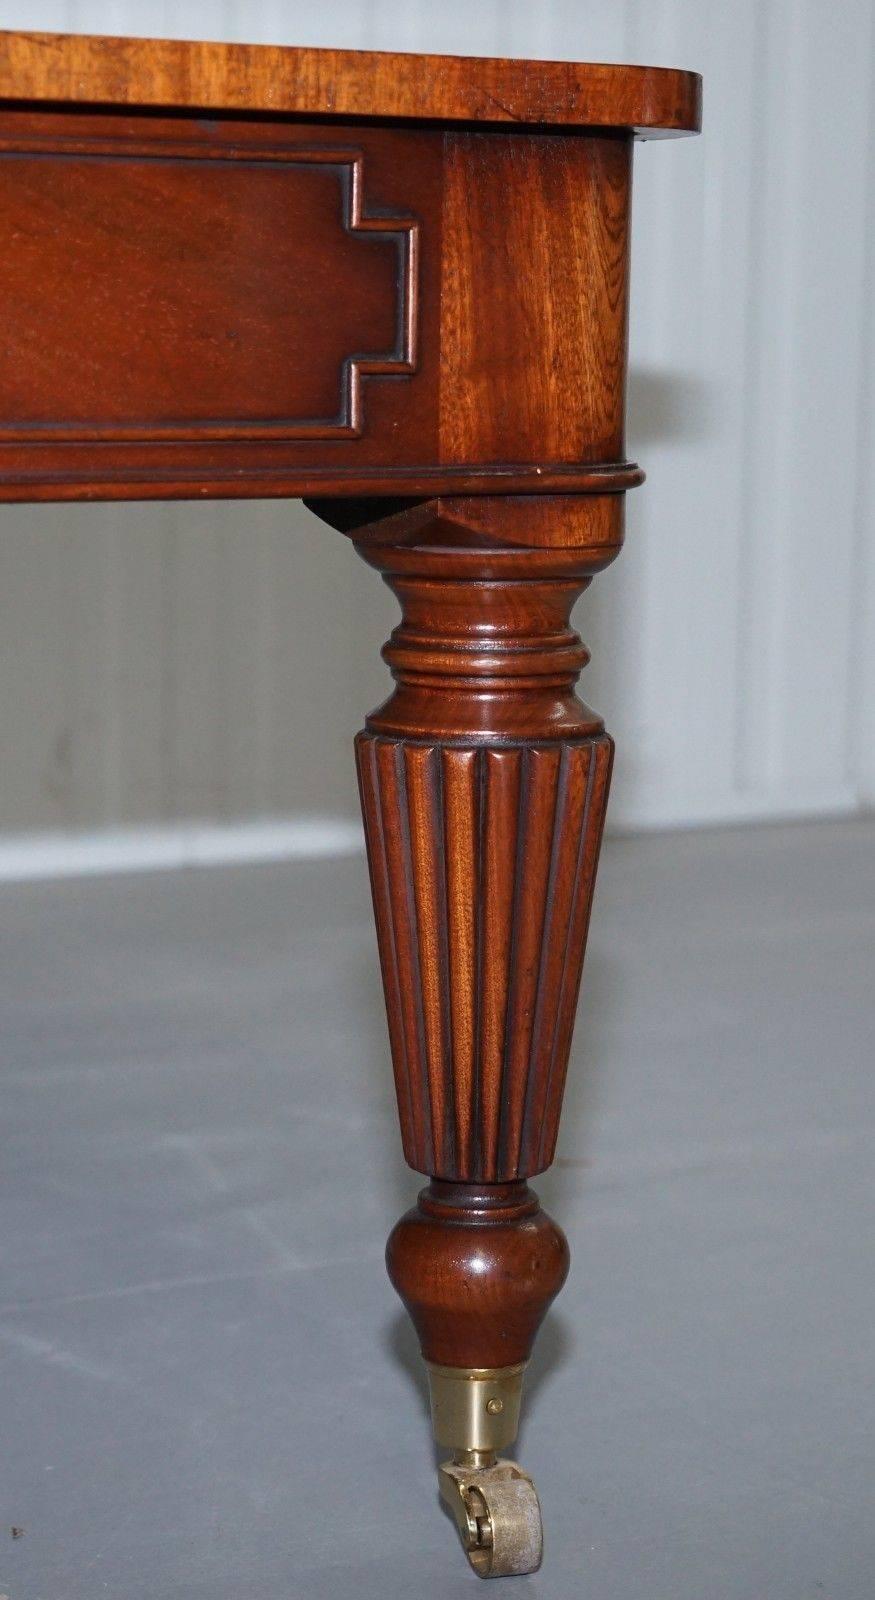 British Square Flamed Mahogany Coffee Table Carbed Legs Castors with Drawers